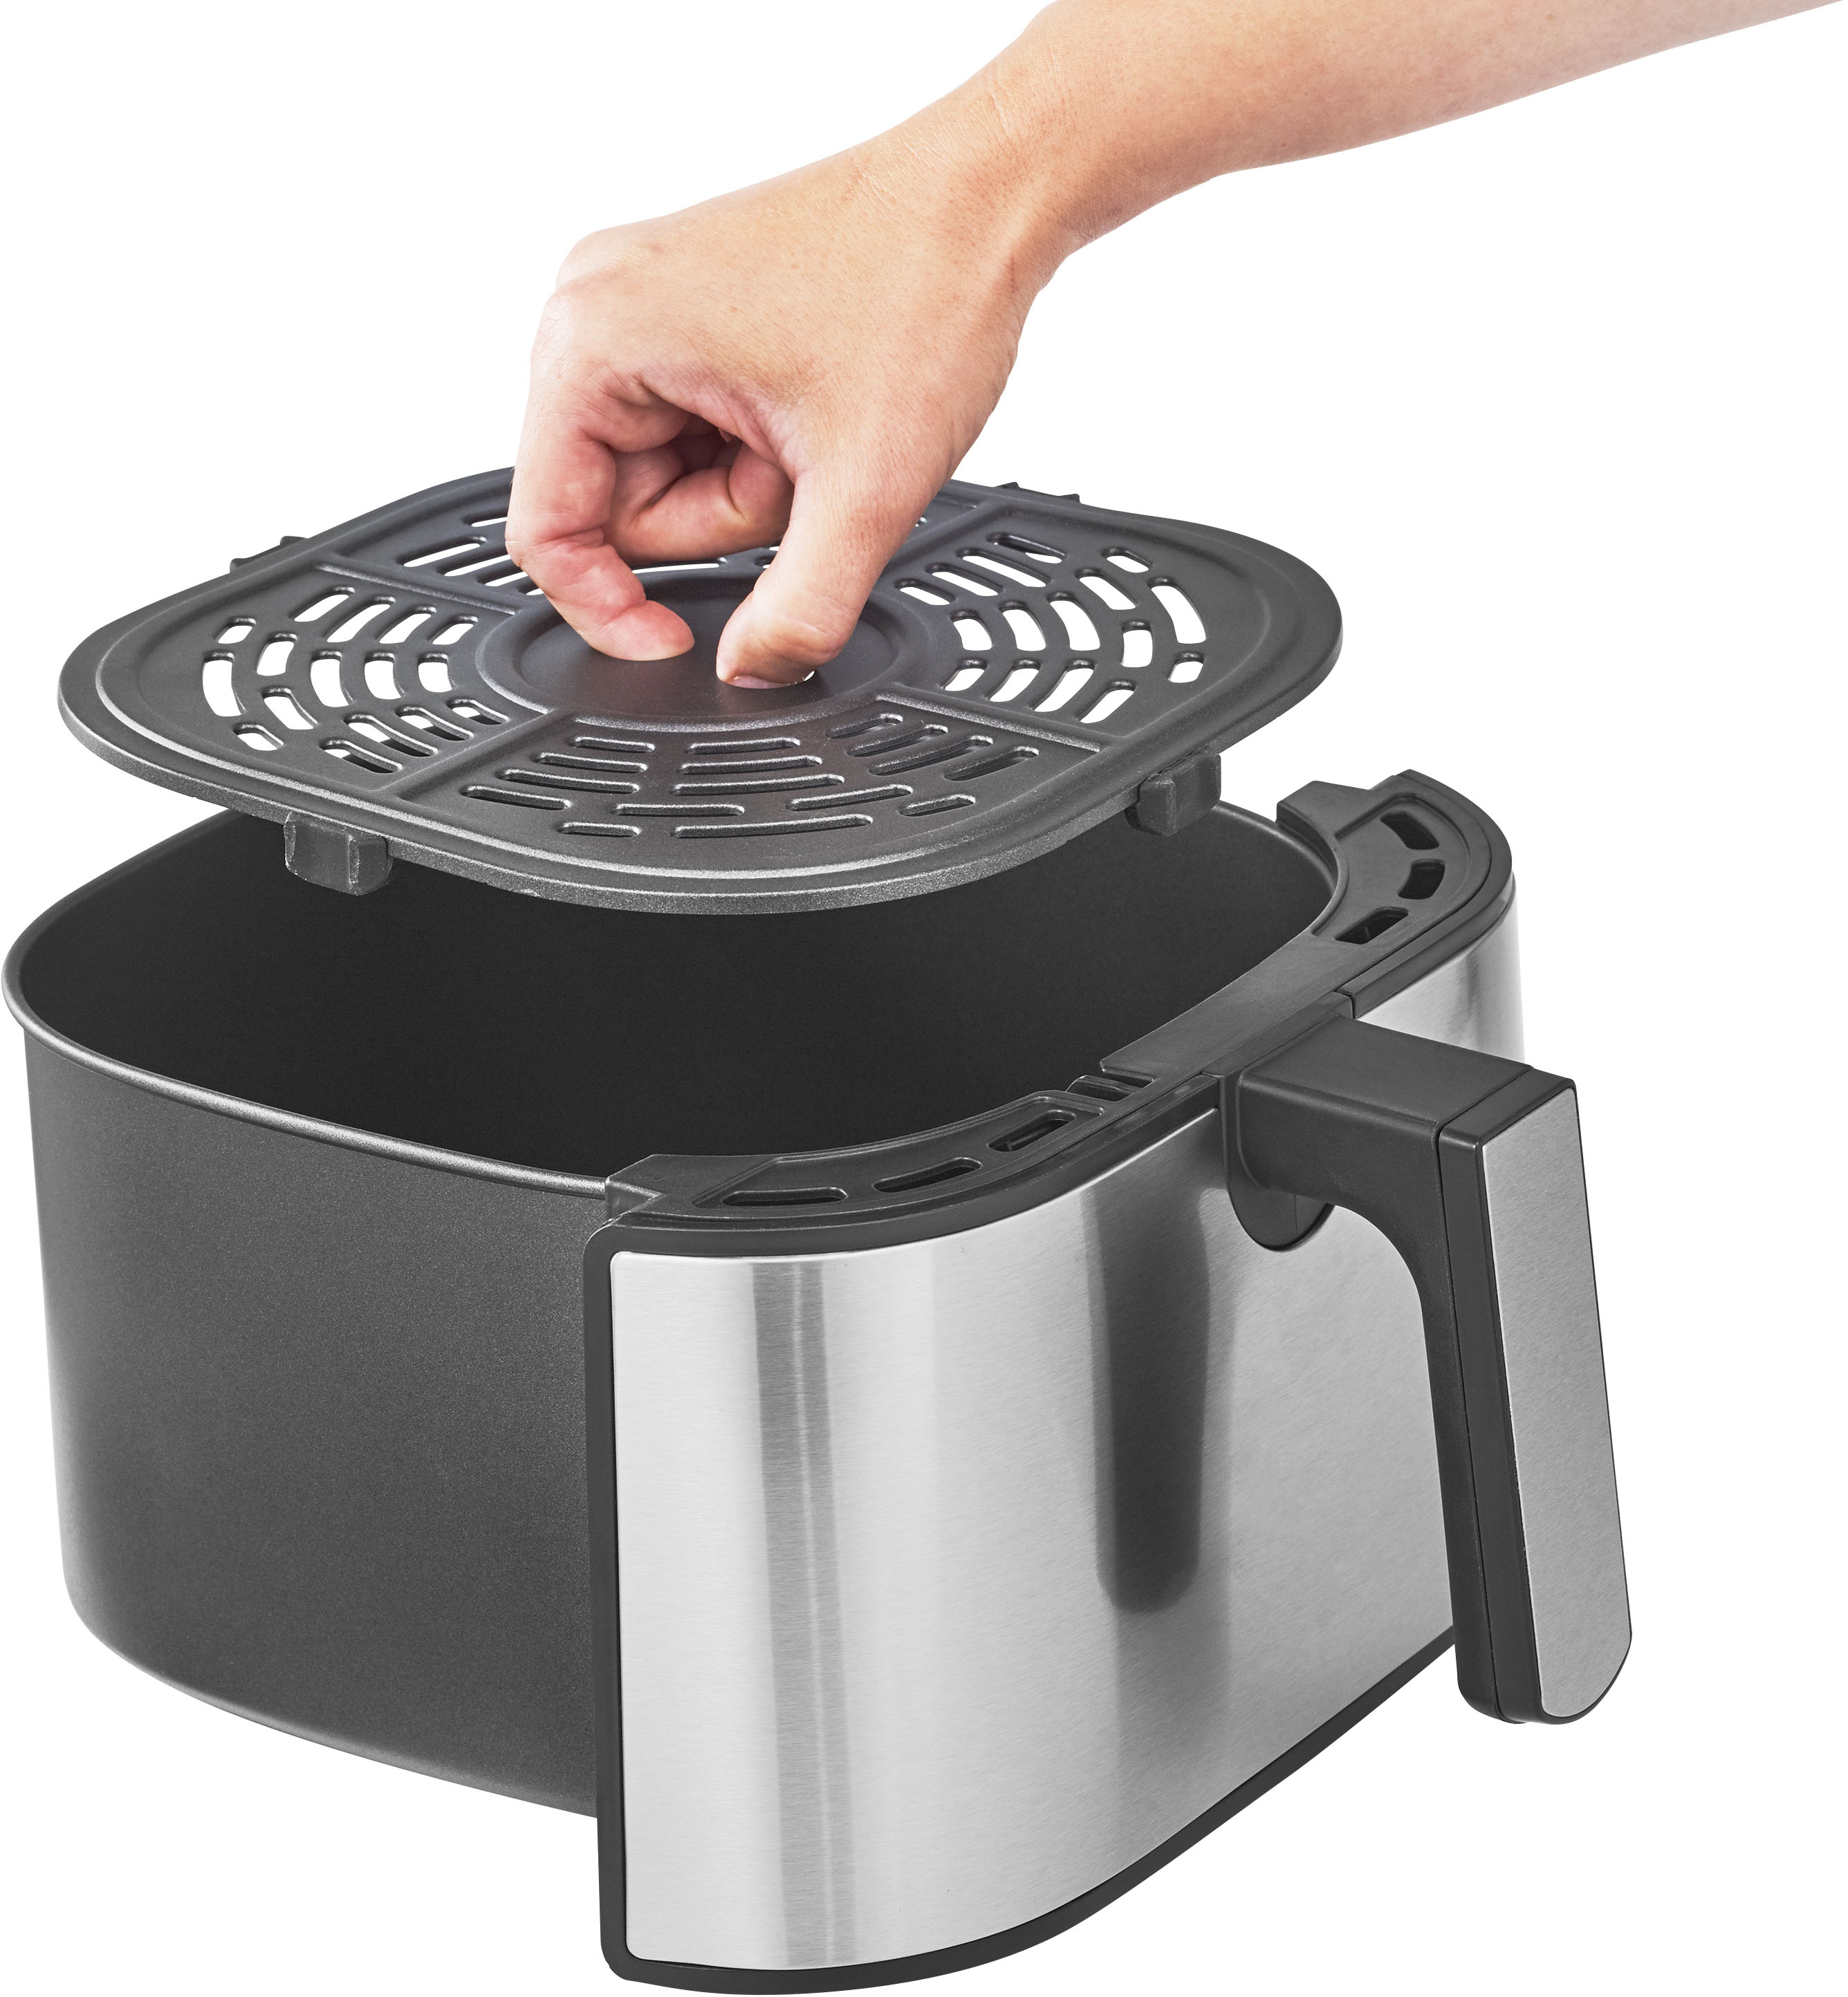 This Giant 12-Quart Air Fryer is $70 OFF at Best Buy Today - The Manual